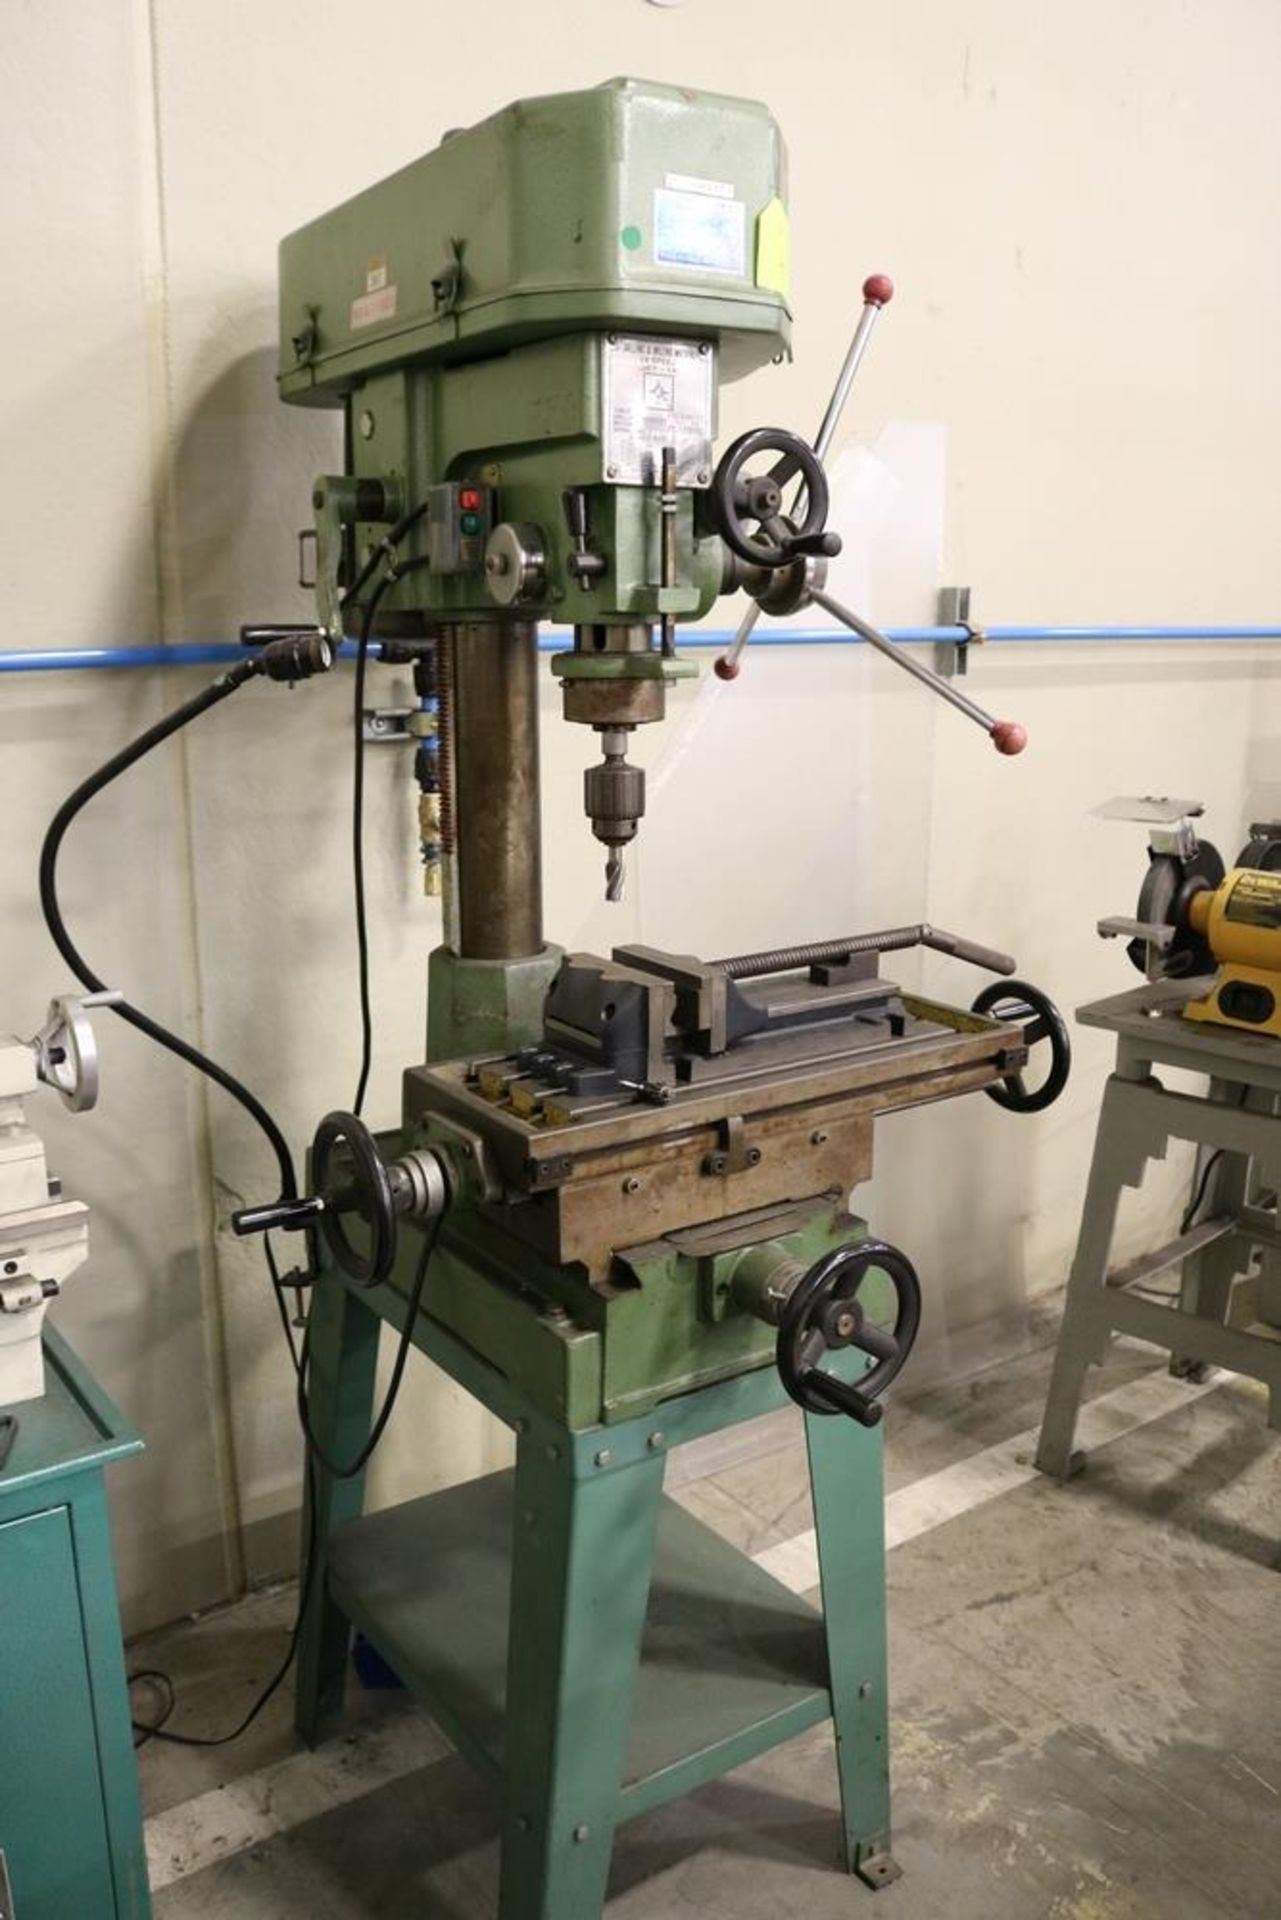 Jet 12 Speed Drilling & Milling Machine Jet-16 1HP 1 Phase Jacob Chuck 6" Speed Vise on Stand